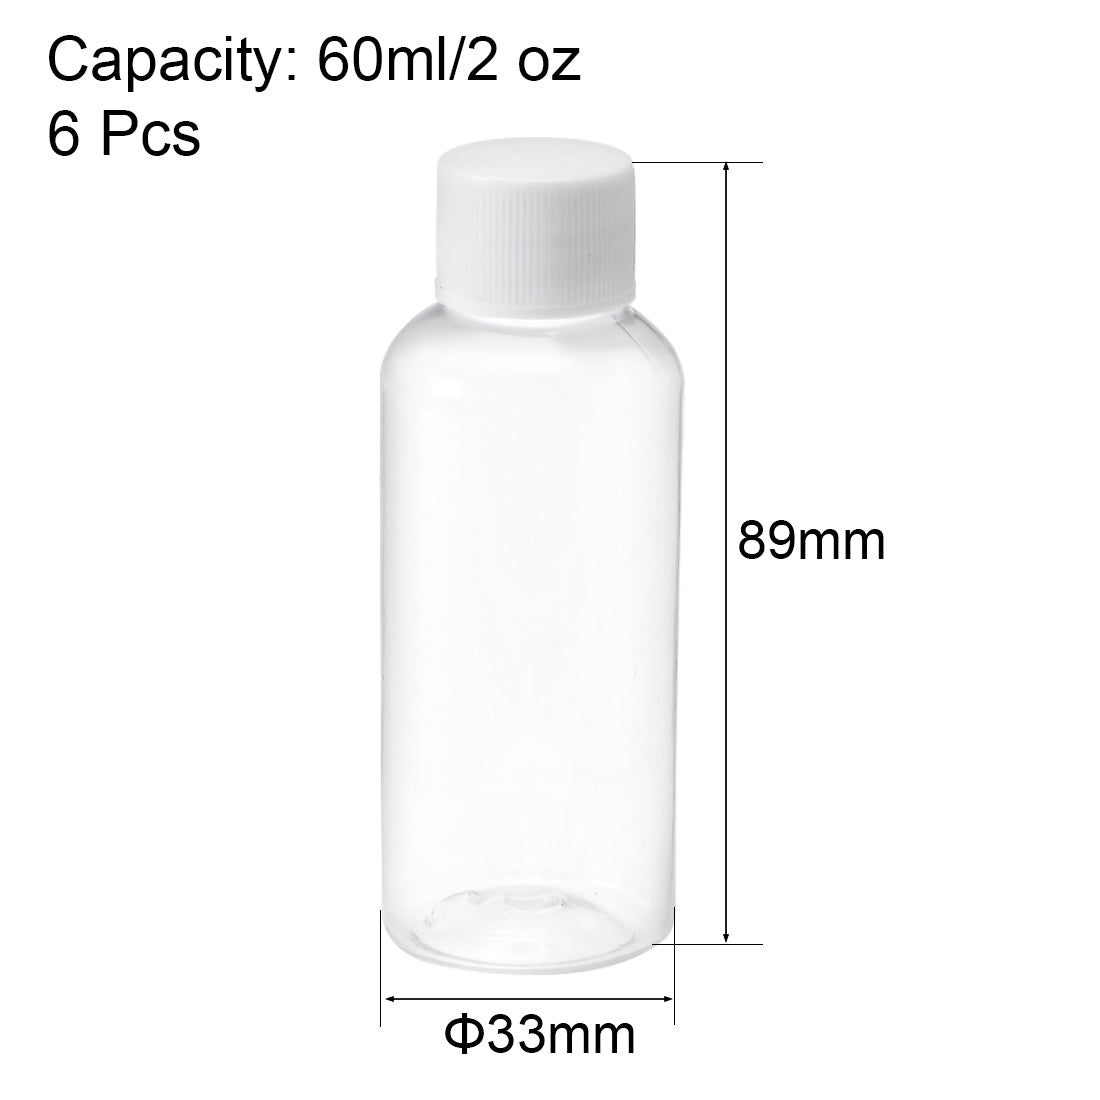 uxcell Uxcell PE Plastic Lab Chemical Reagent Bottle, 60ml/2 oz Small Mouth Sample Sealing Liquid Storage Container, Transparent 6pcs